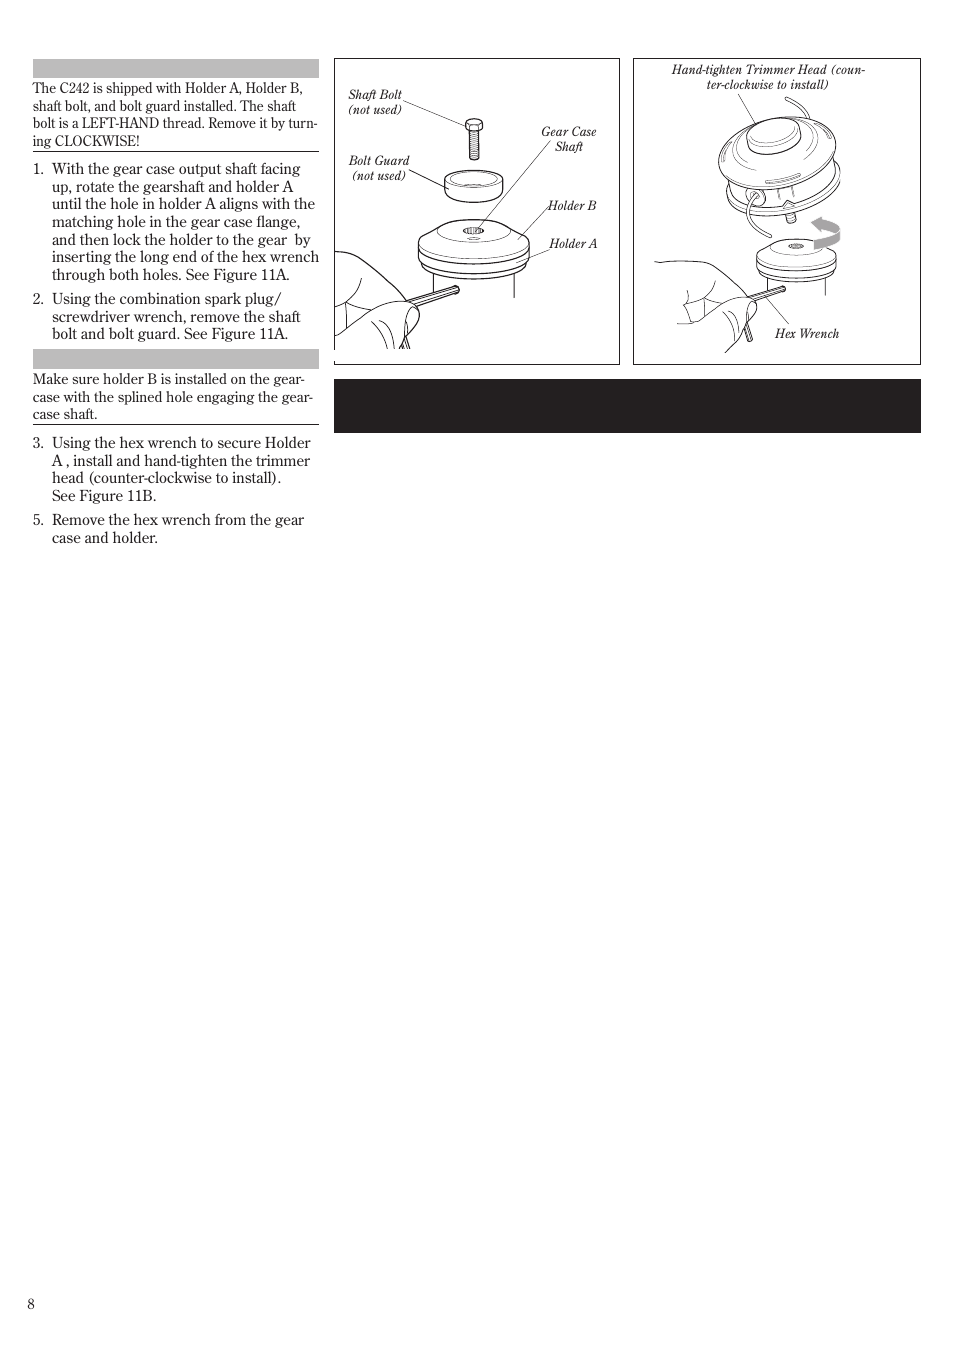 Installing a trimmer head | Shindaiwa 81359 User Manual | Page 8 / 40